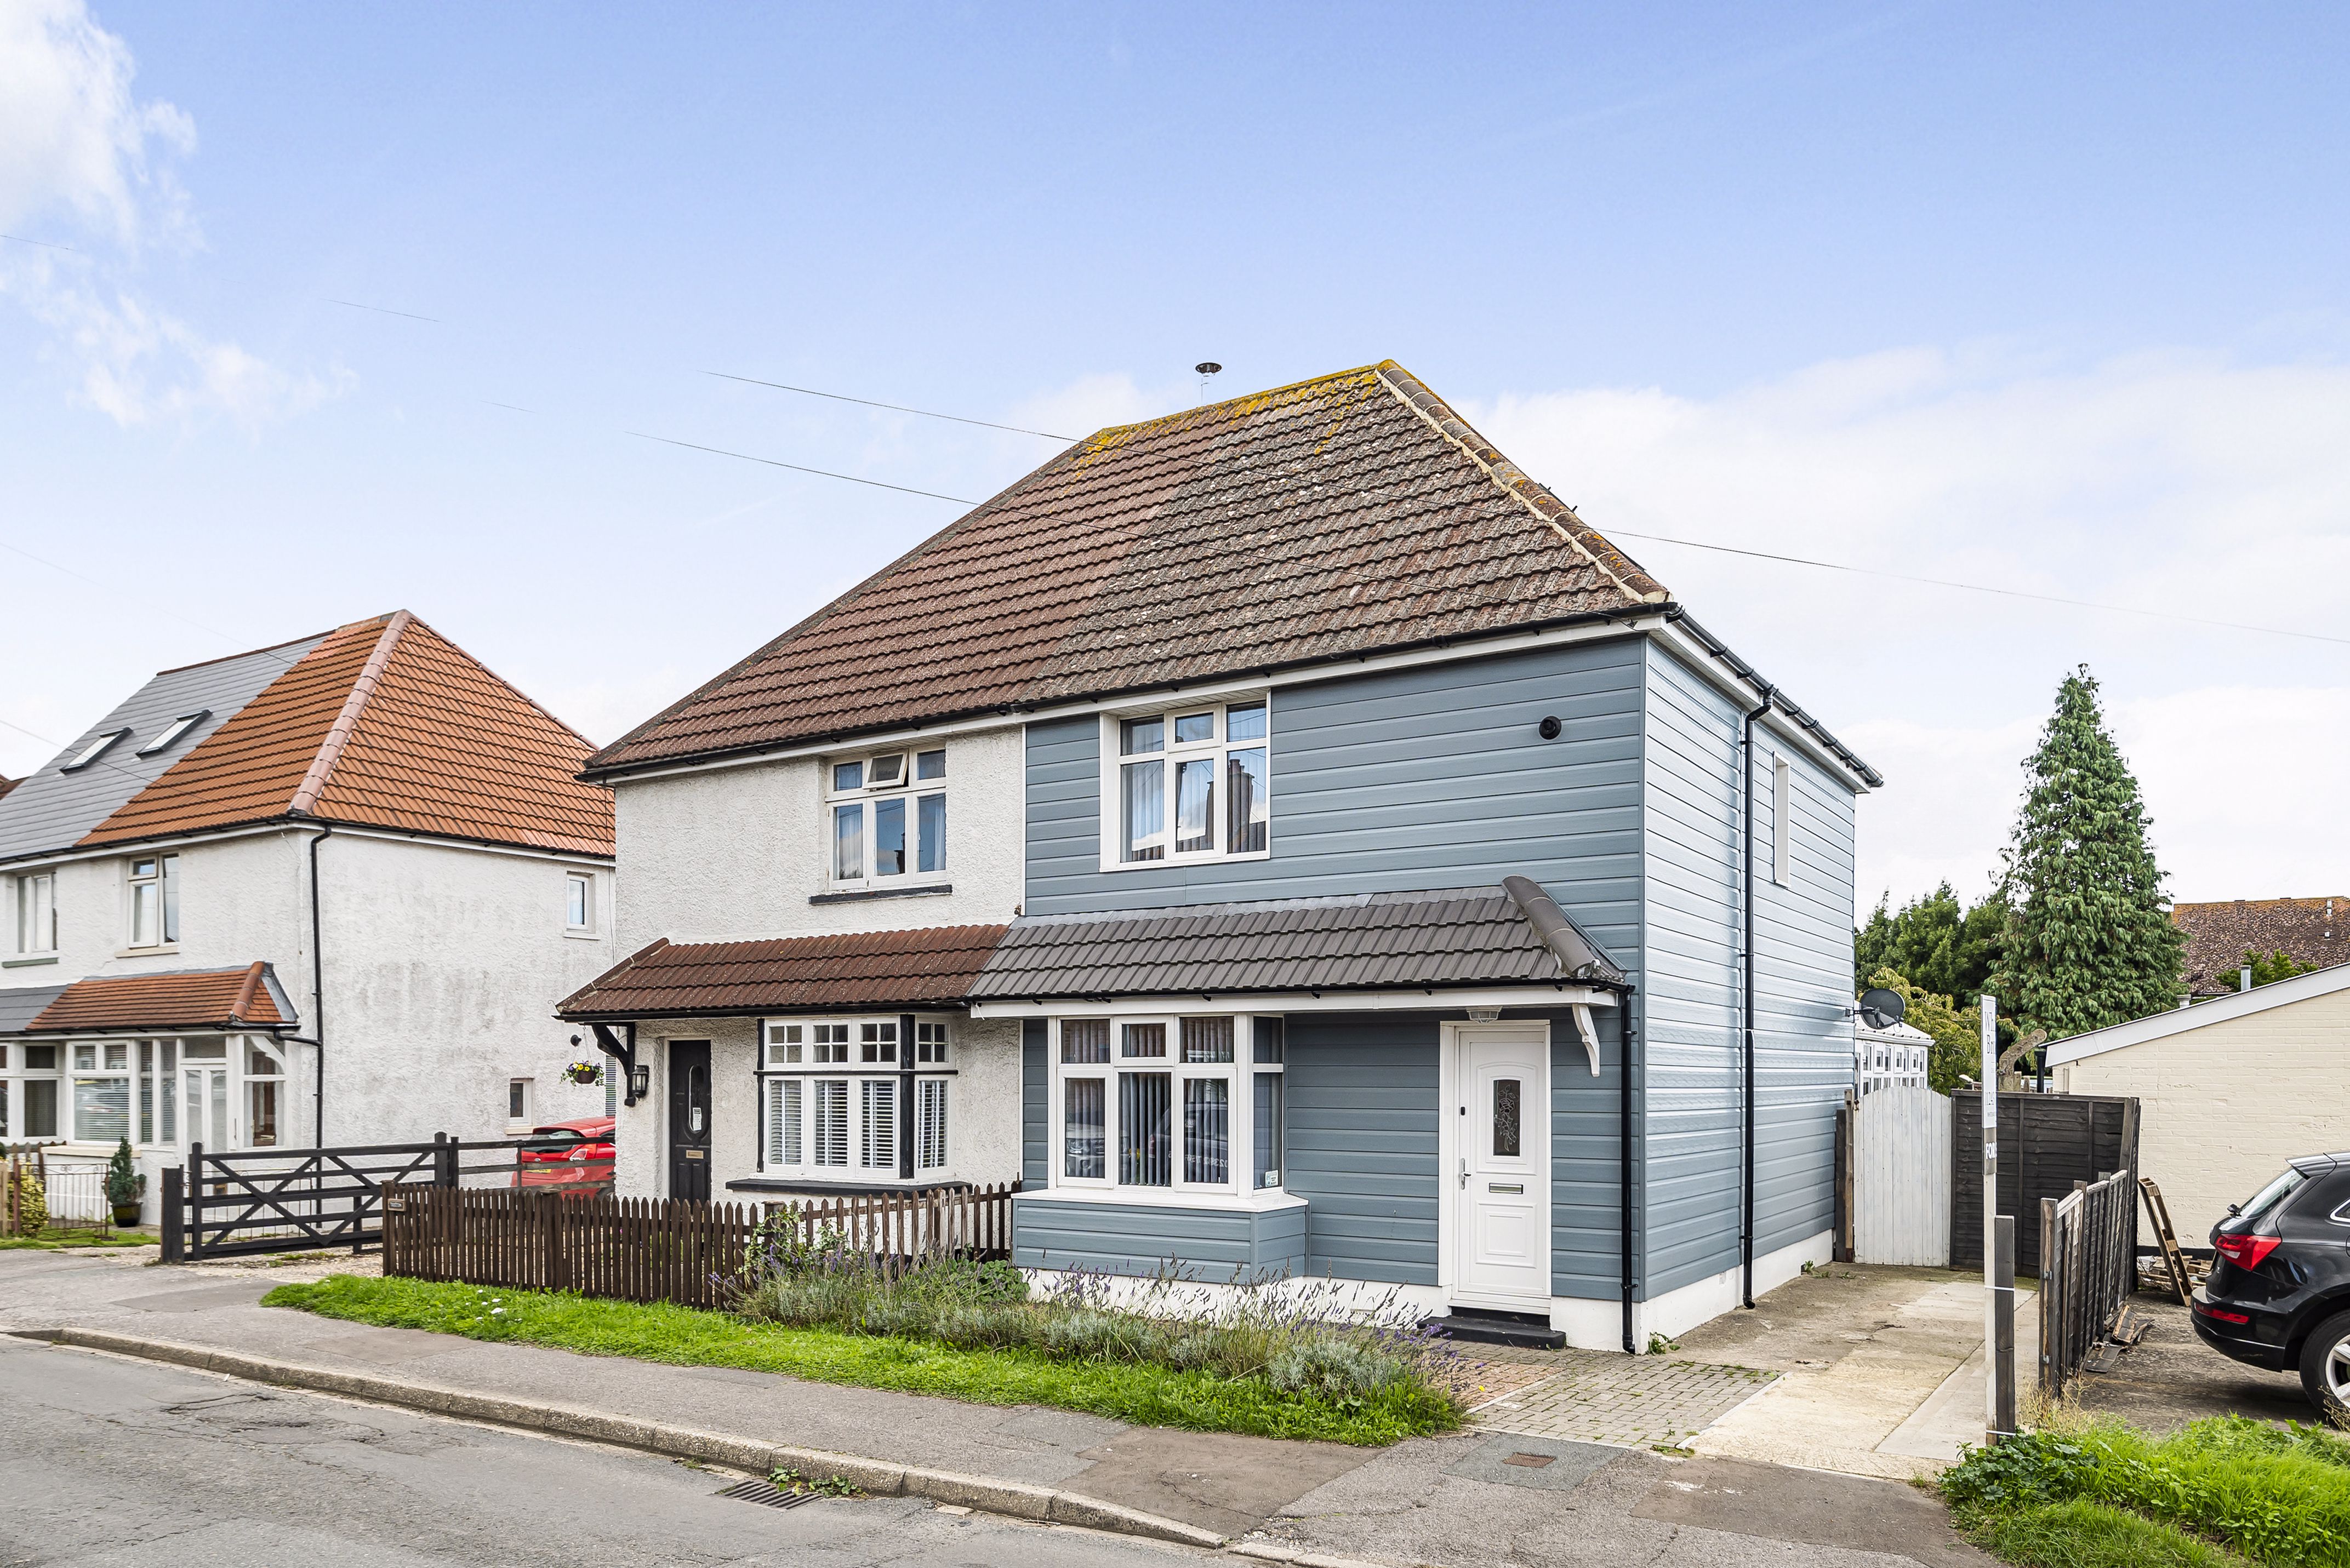 3 bed house for sale in Clovelly Road, Southbourne - Property Image 1